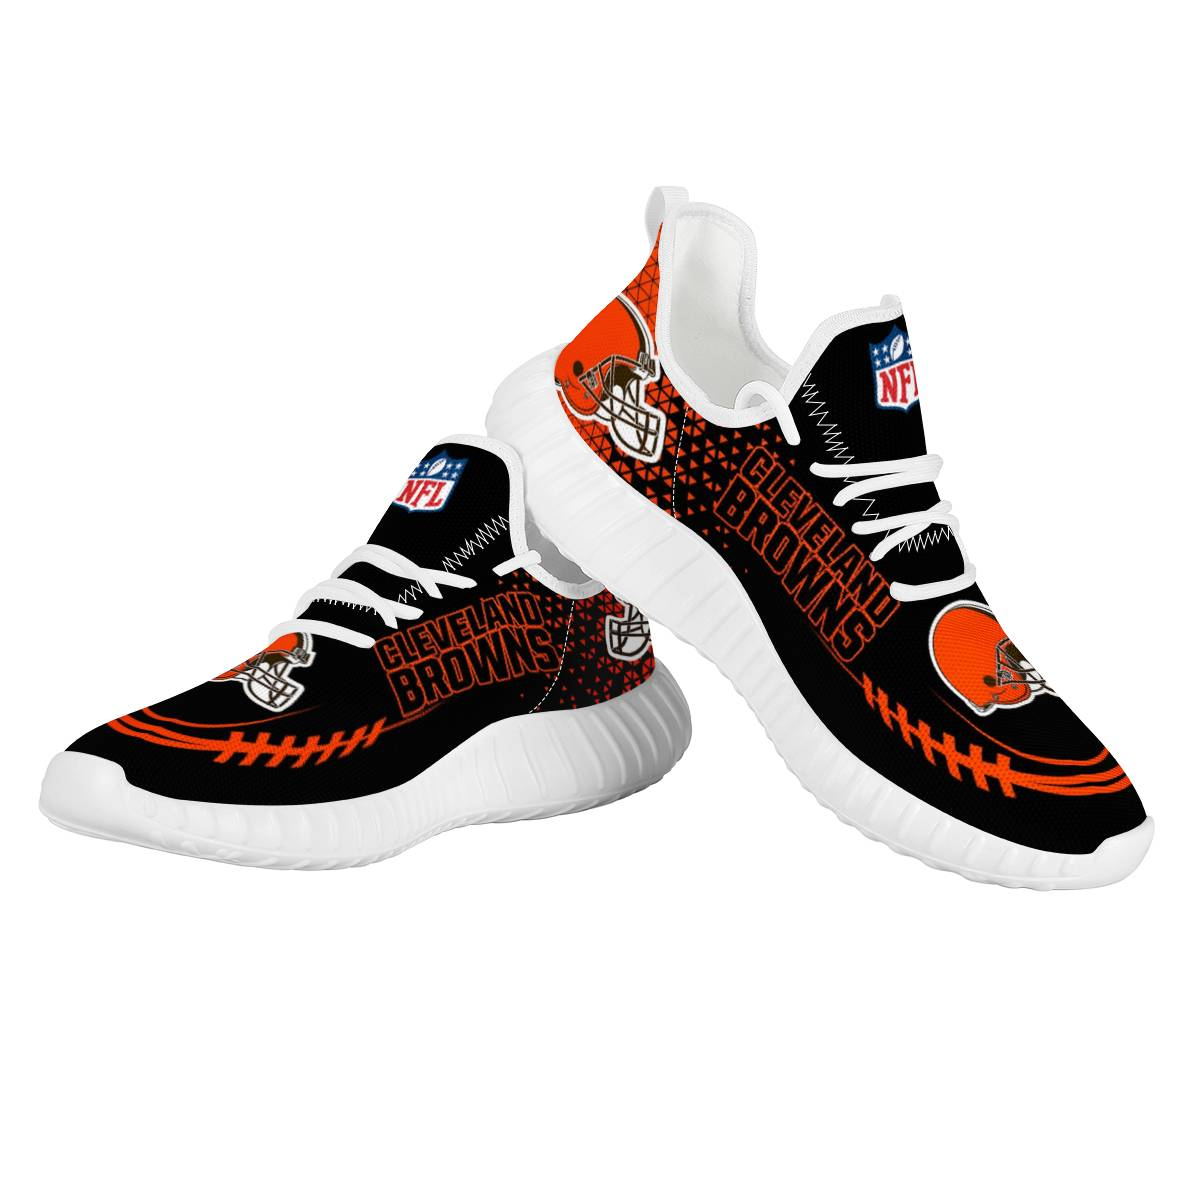 Women's Cleveland Browns Mesh Knit Sneakers/Shoes 004